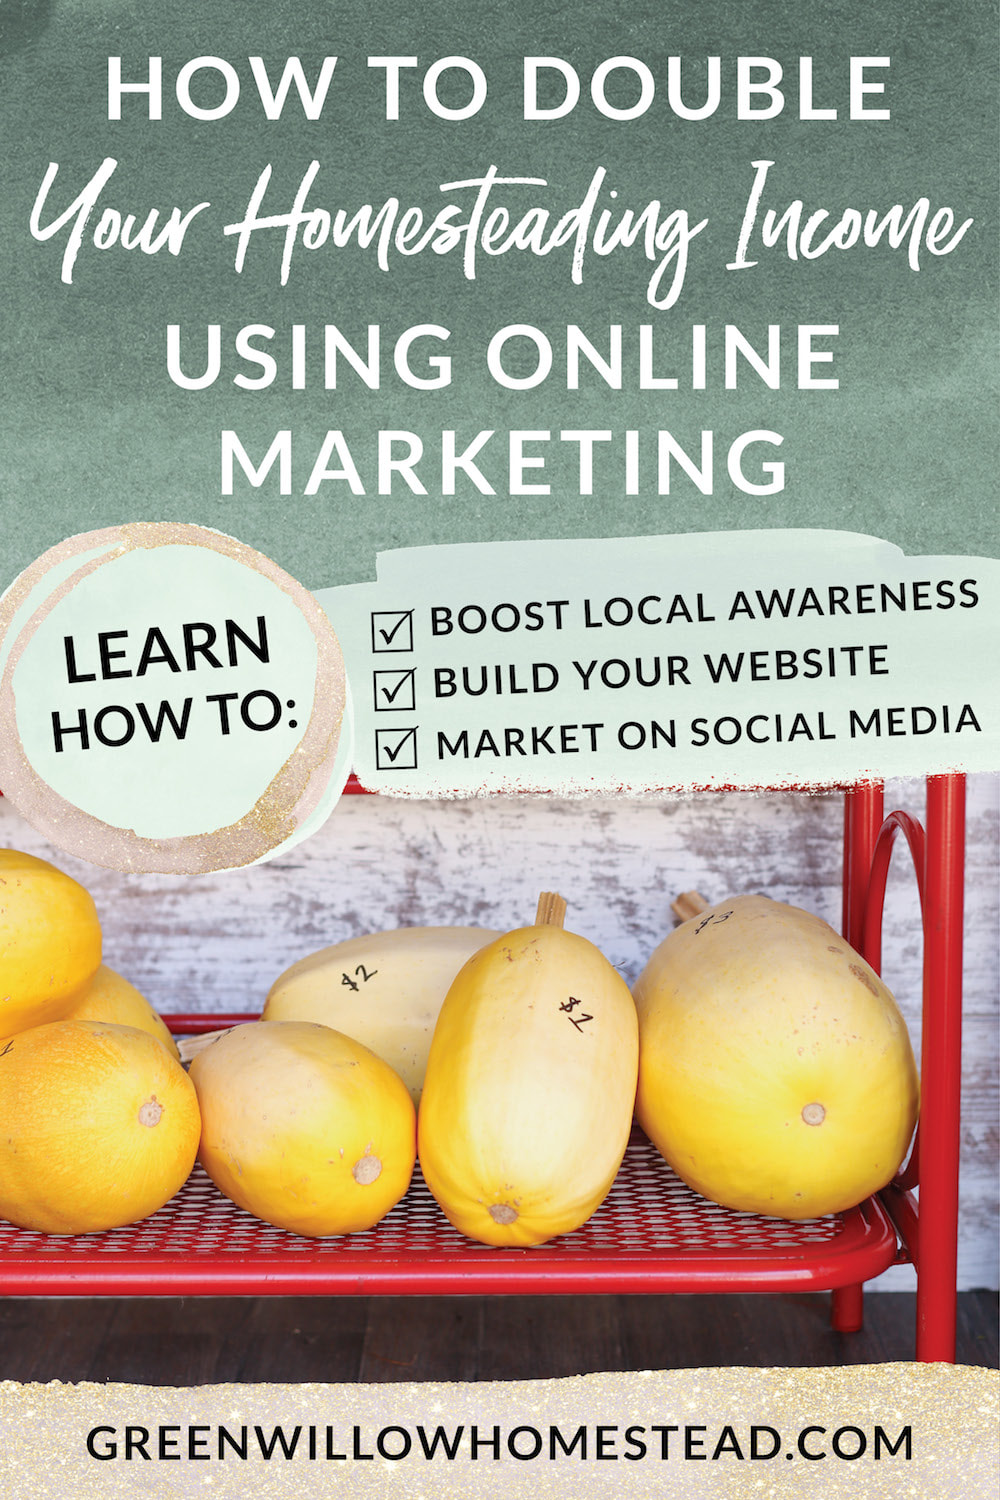 How to double your homesteading income using online marketing